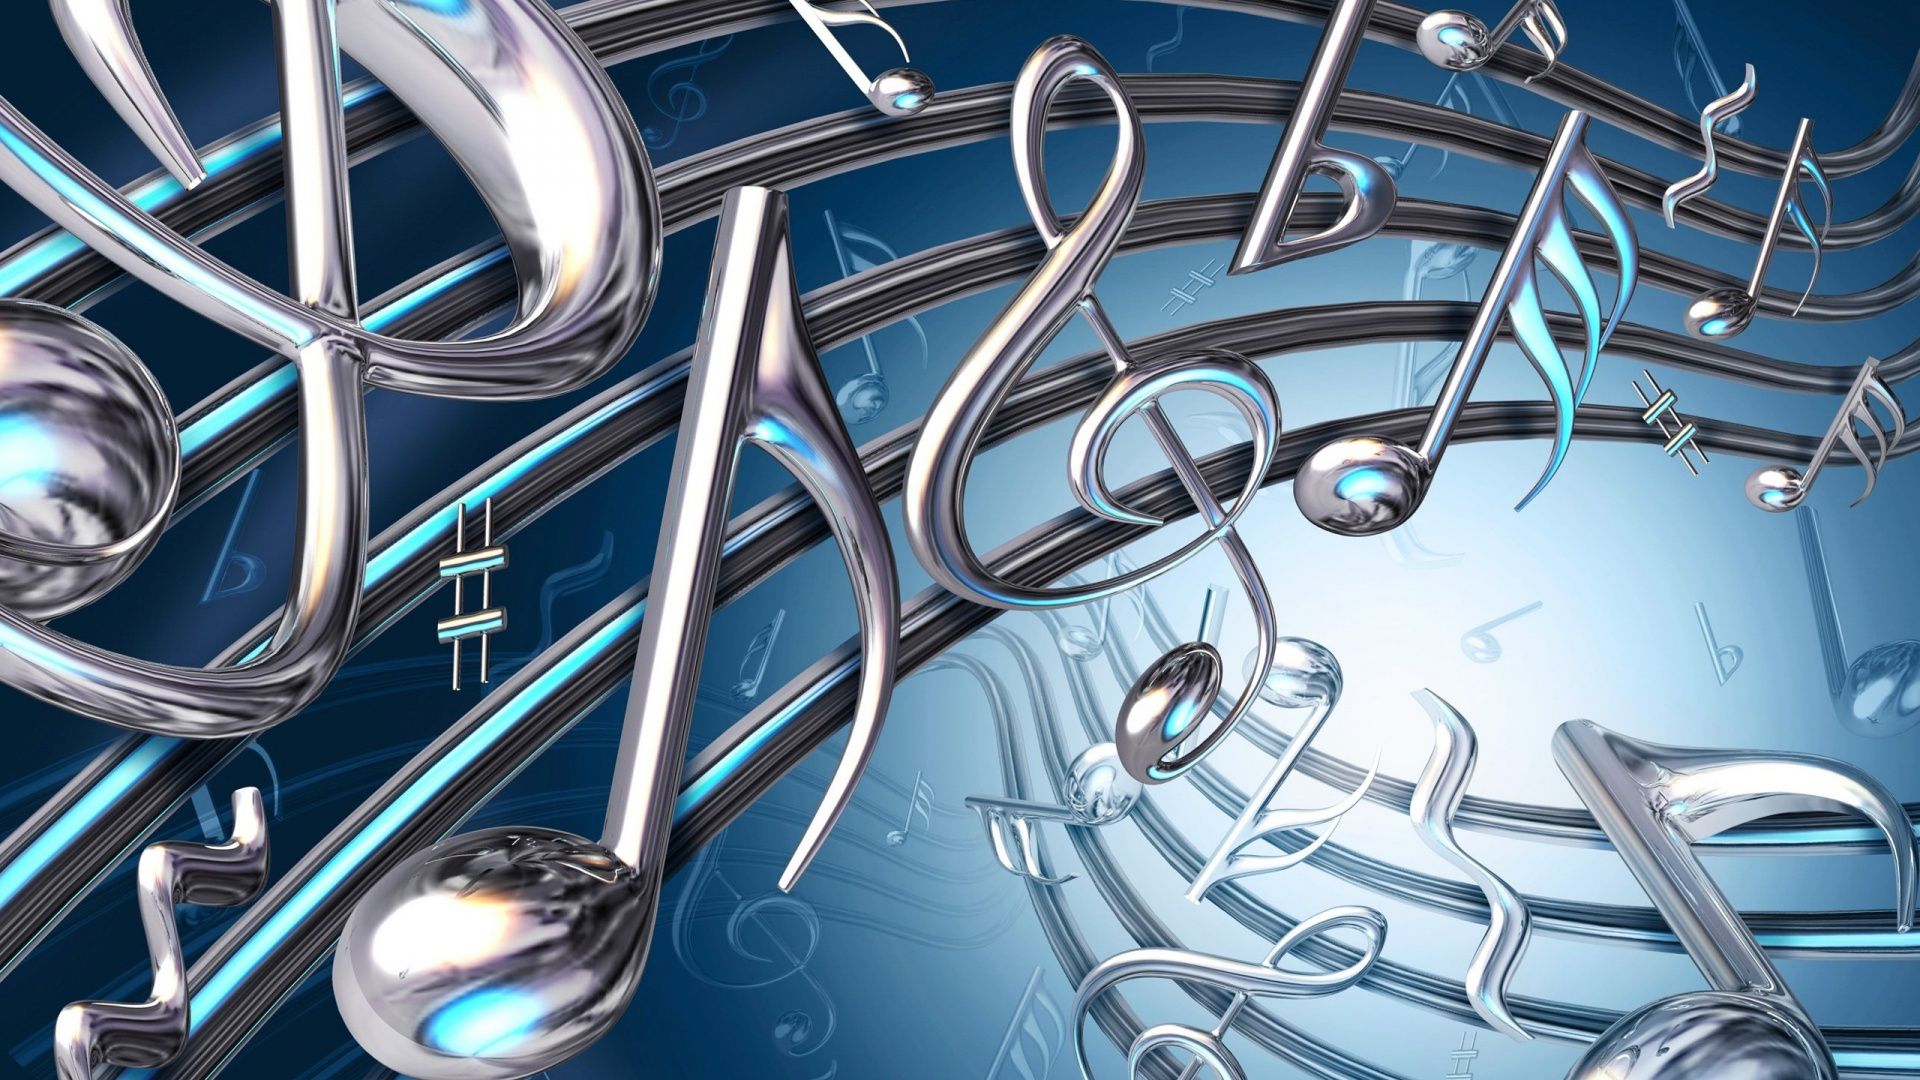 Details 65 wallpaper with music notes latest  incdgdbentre